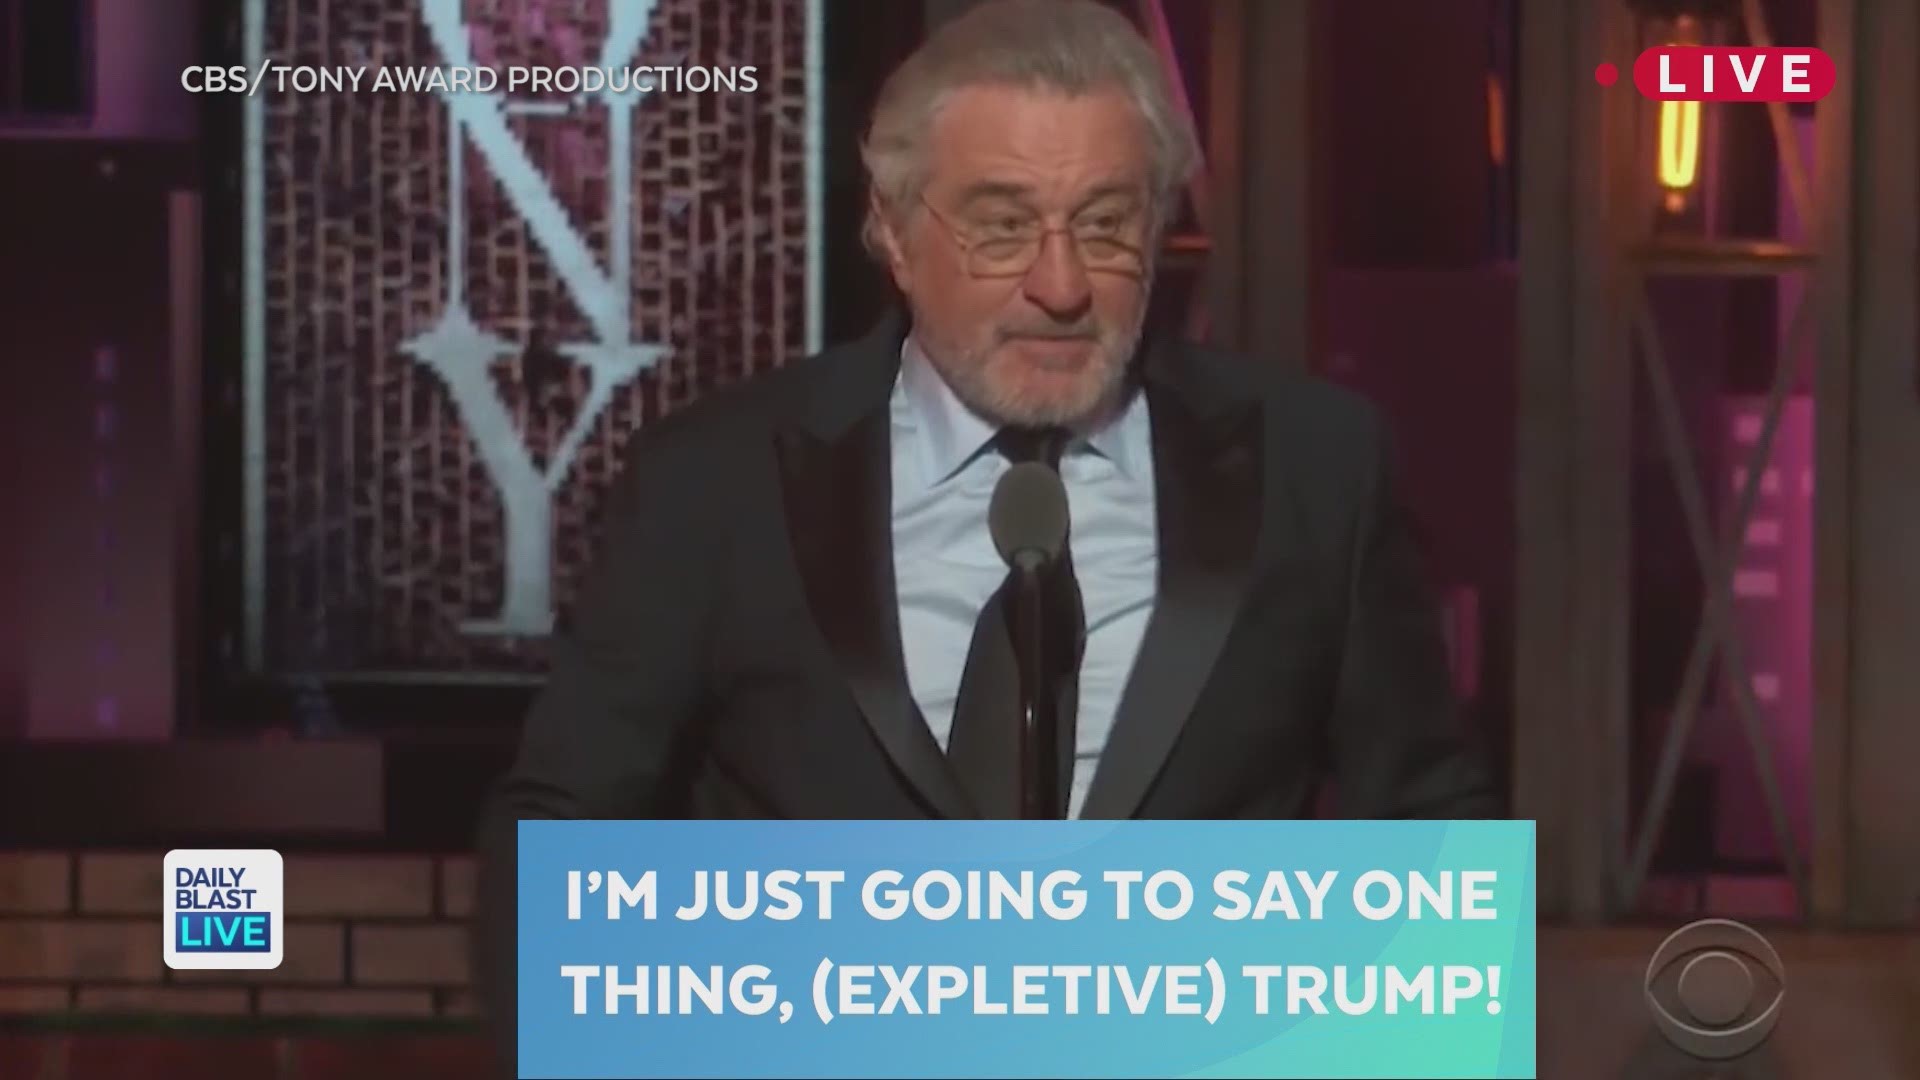 Legendary actor, Robert De Niro, is facing backlash for his bleeped moment. While presenting at Sunday nights Tony Awards, De Niro didn't waste anytime letting the f-bombs fly about President Trump. Daily Blast LIVE co-hosts discuss whether this profanity